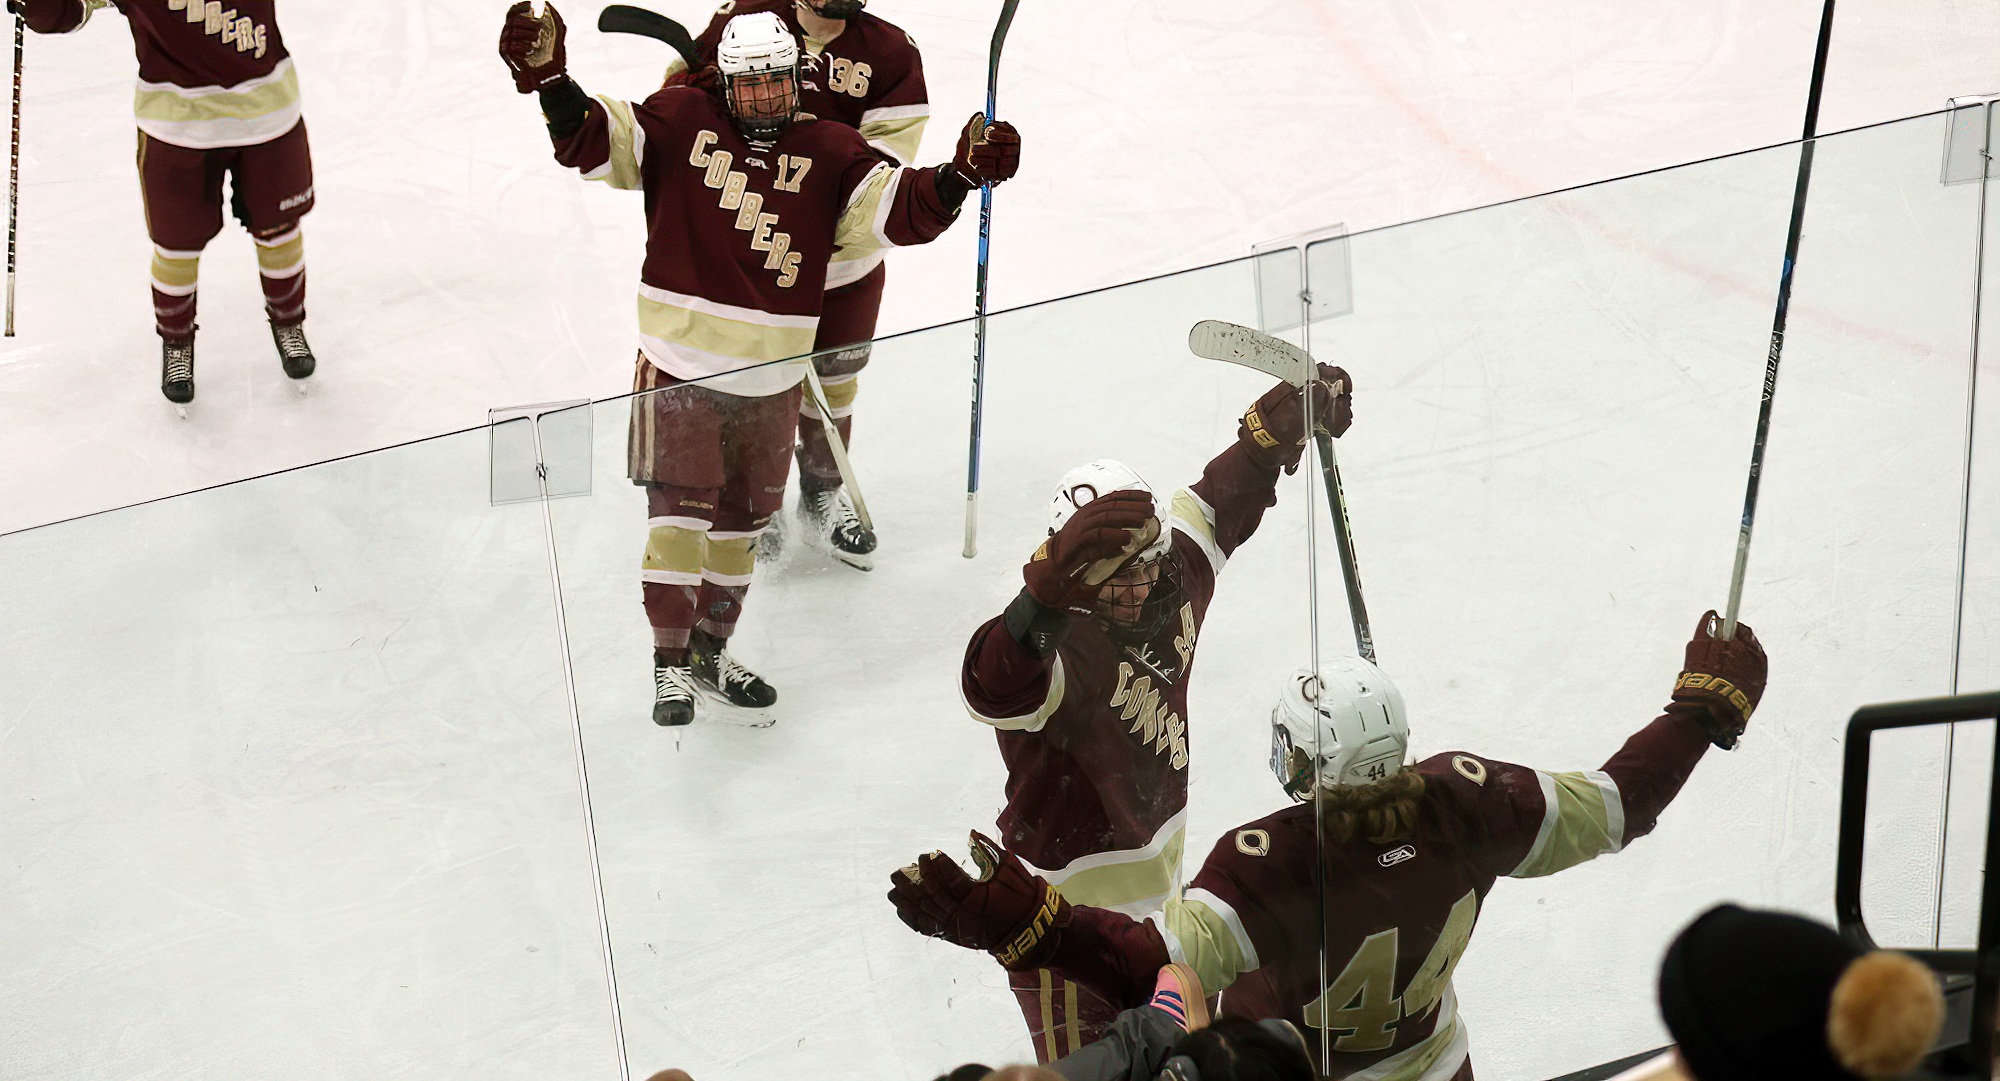 The Cobbers celebrate one of their three power play goals in the team's 5-4 win at St. Olaf. (Photo courtesy of Kaj Doerring)